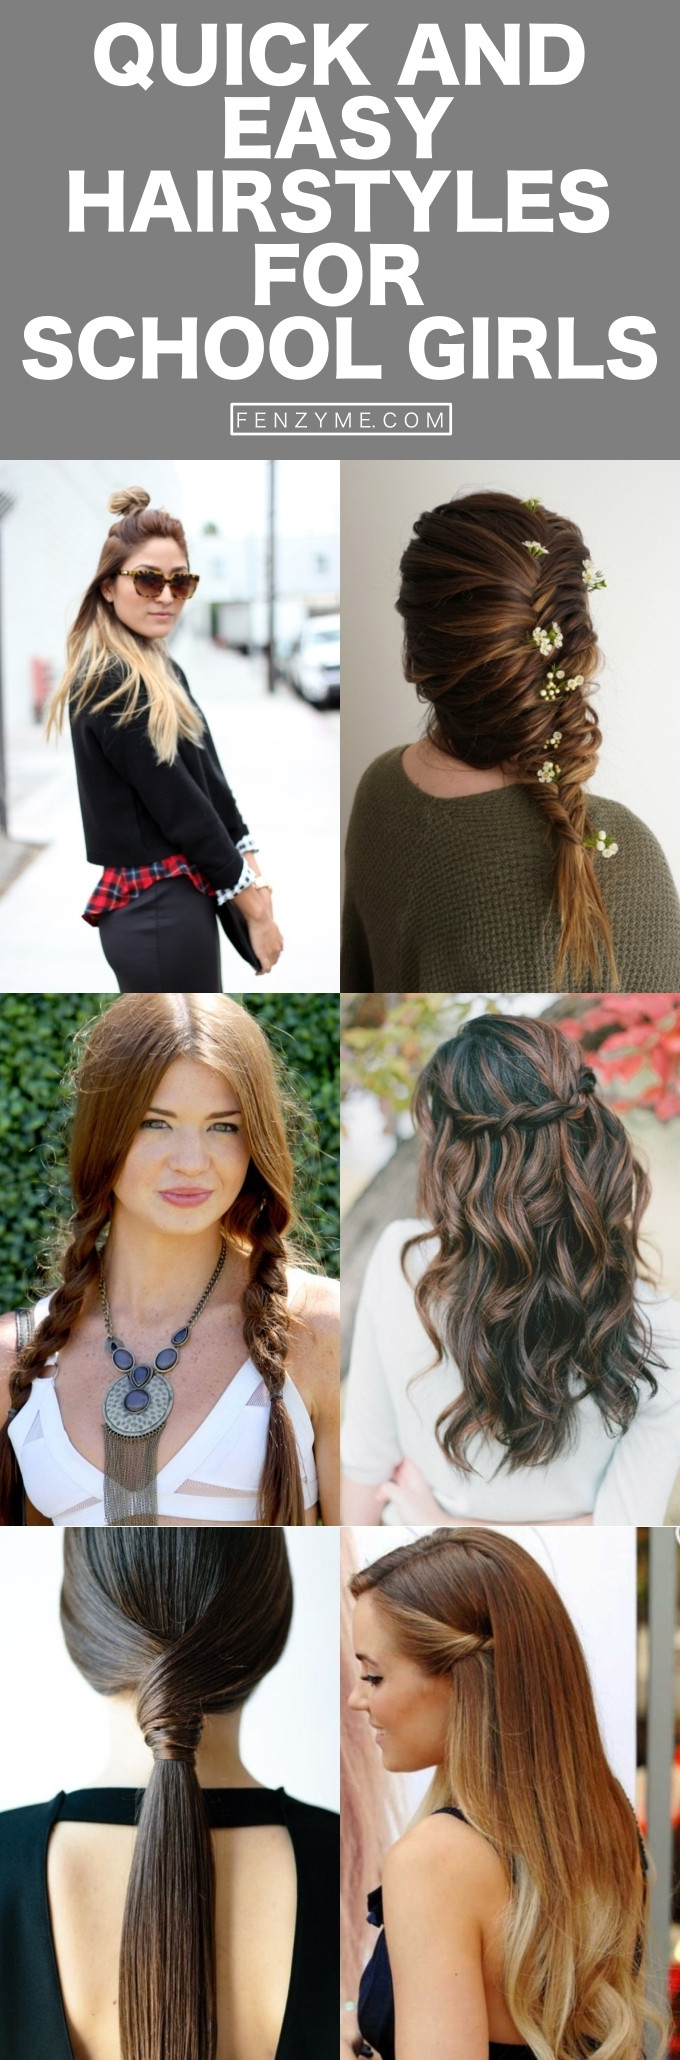 Fast And Easy Hairstyles For School
 42 Quick and Easy Hairstyles for School Girls